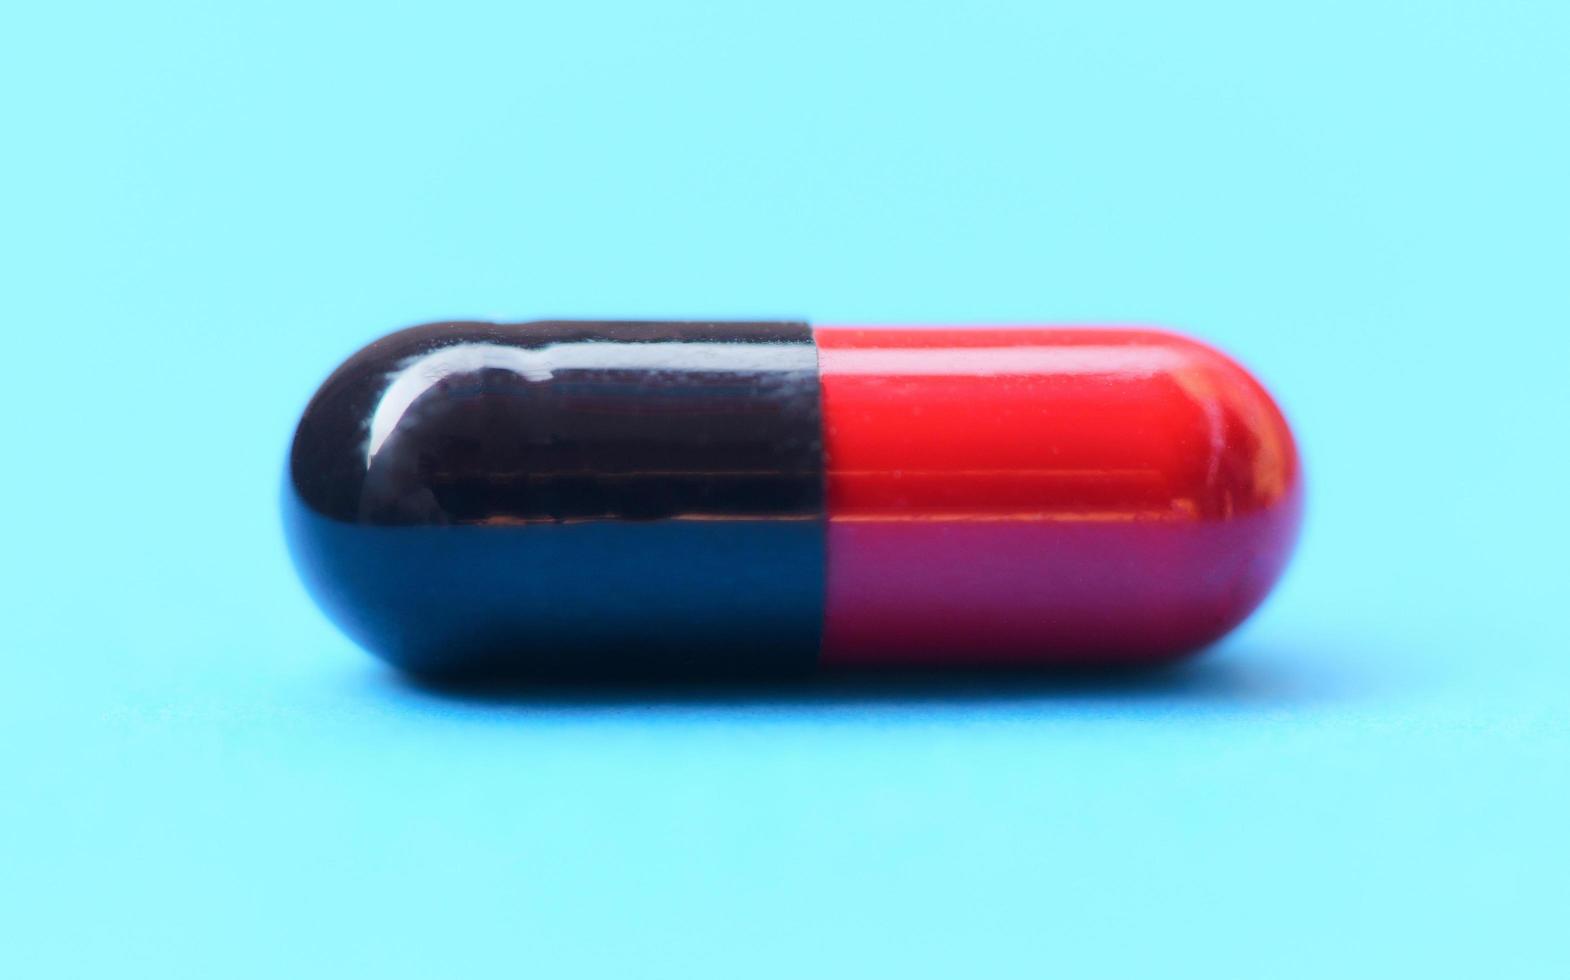 Capsule pill selective focus- Close up of color red and black medicine pills capsule drugs concept photo